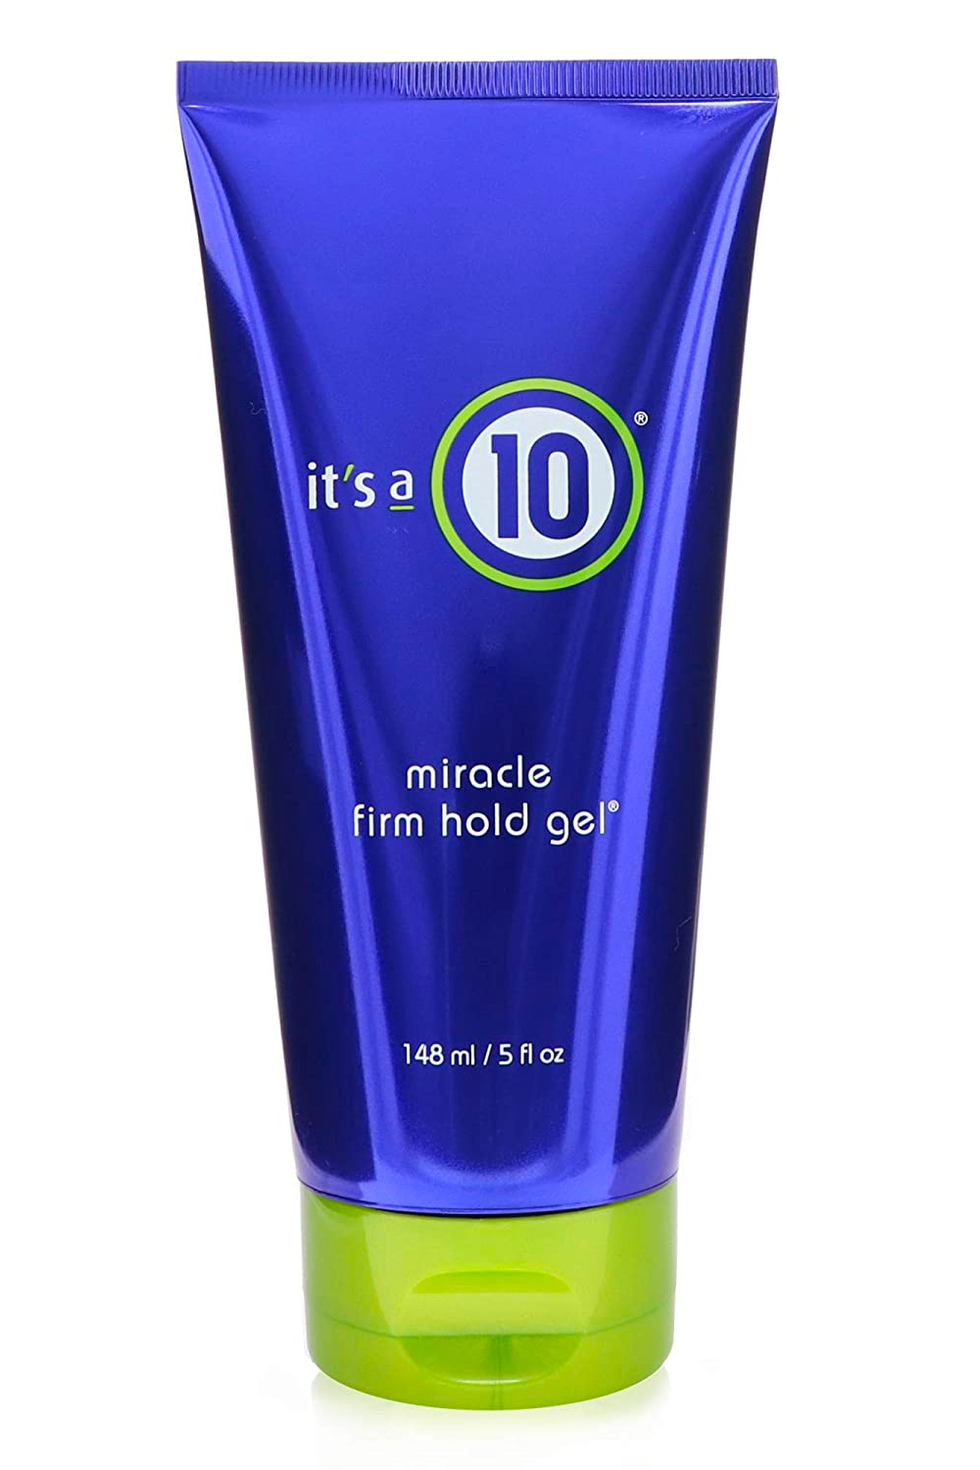 It’s a 10 Haircare Miracle Firm Hold Gel